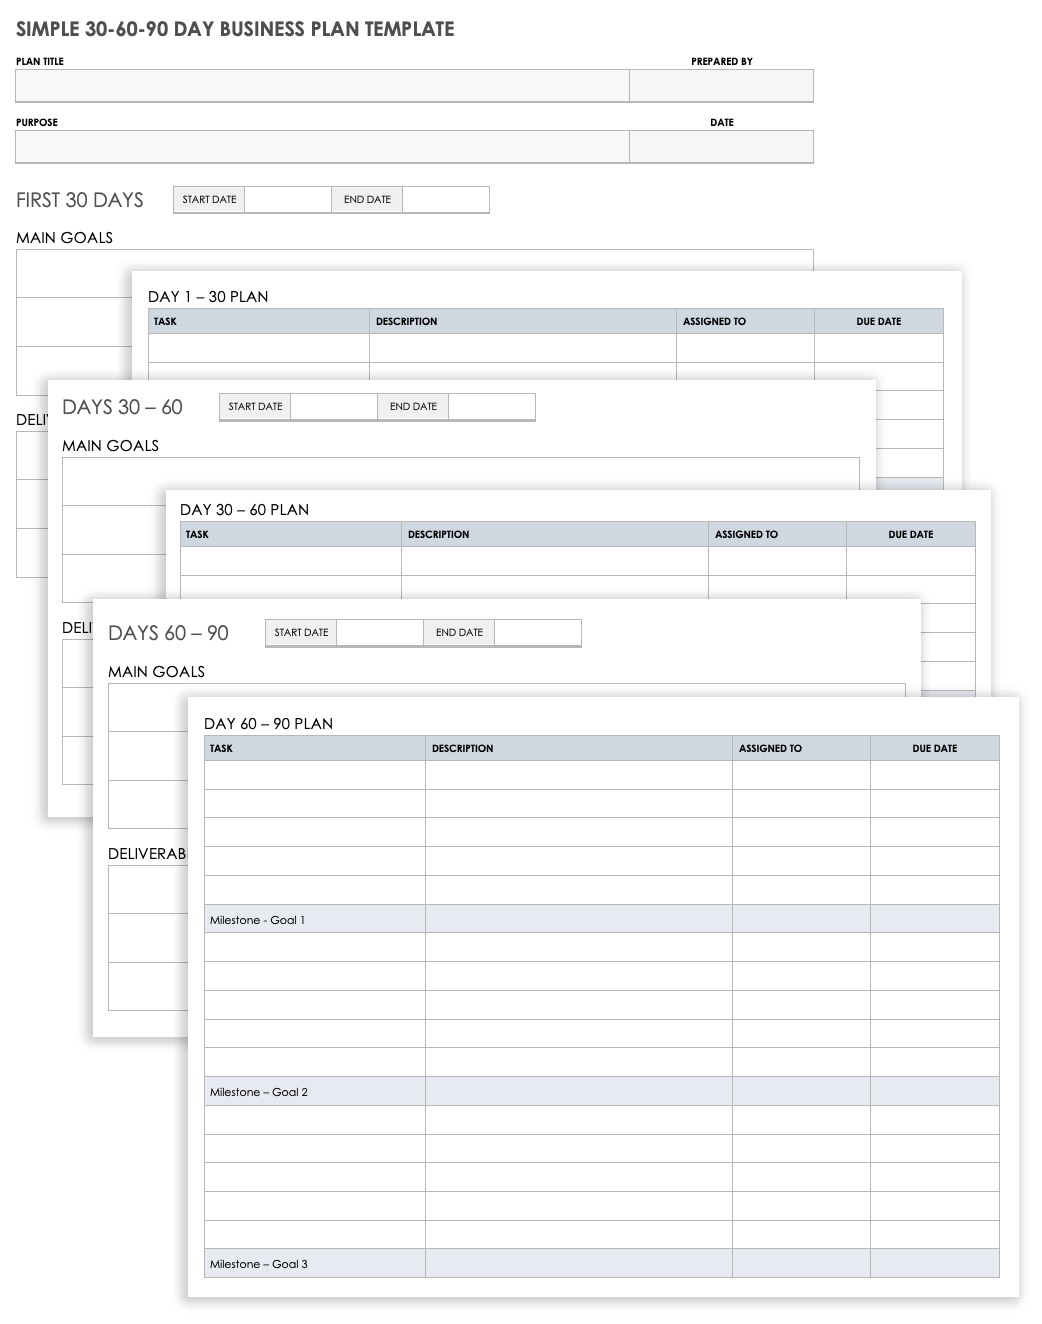 Free 22-22-22-Day Business Plan Templates  Smartsheet Within Partner Business Plan Template